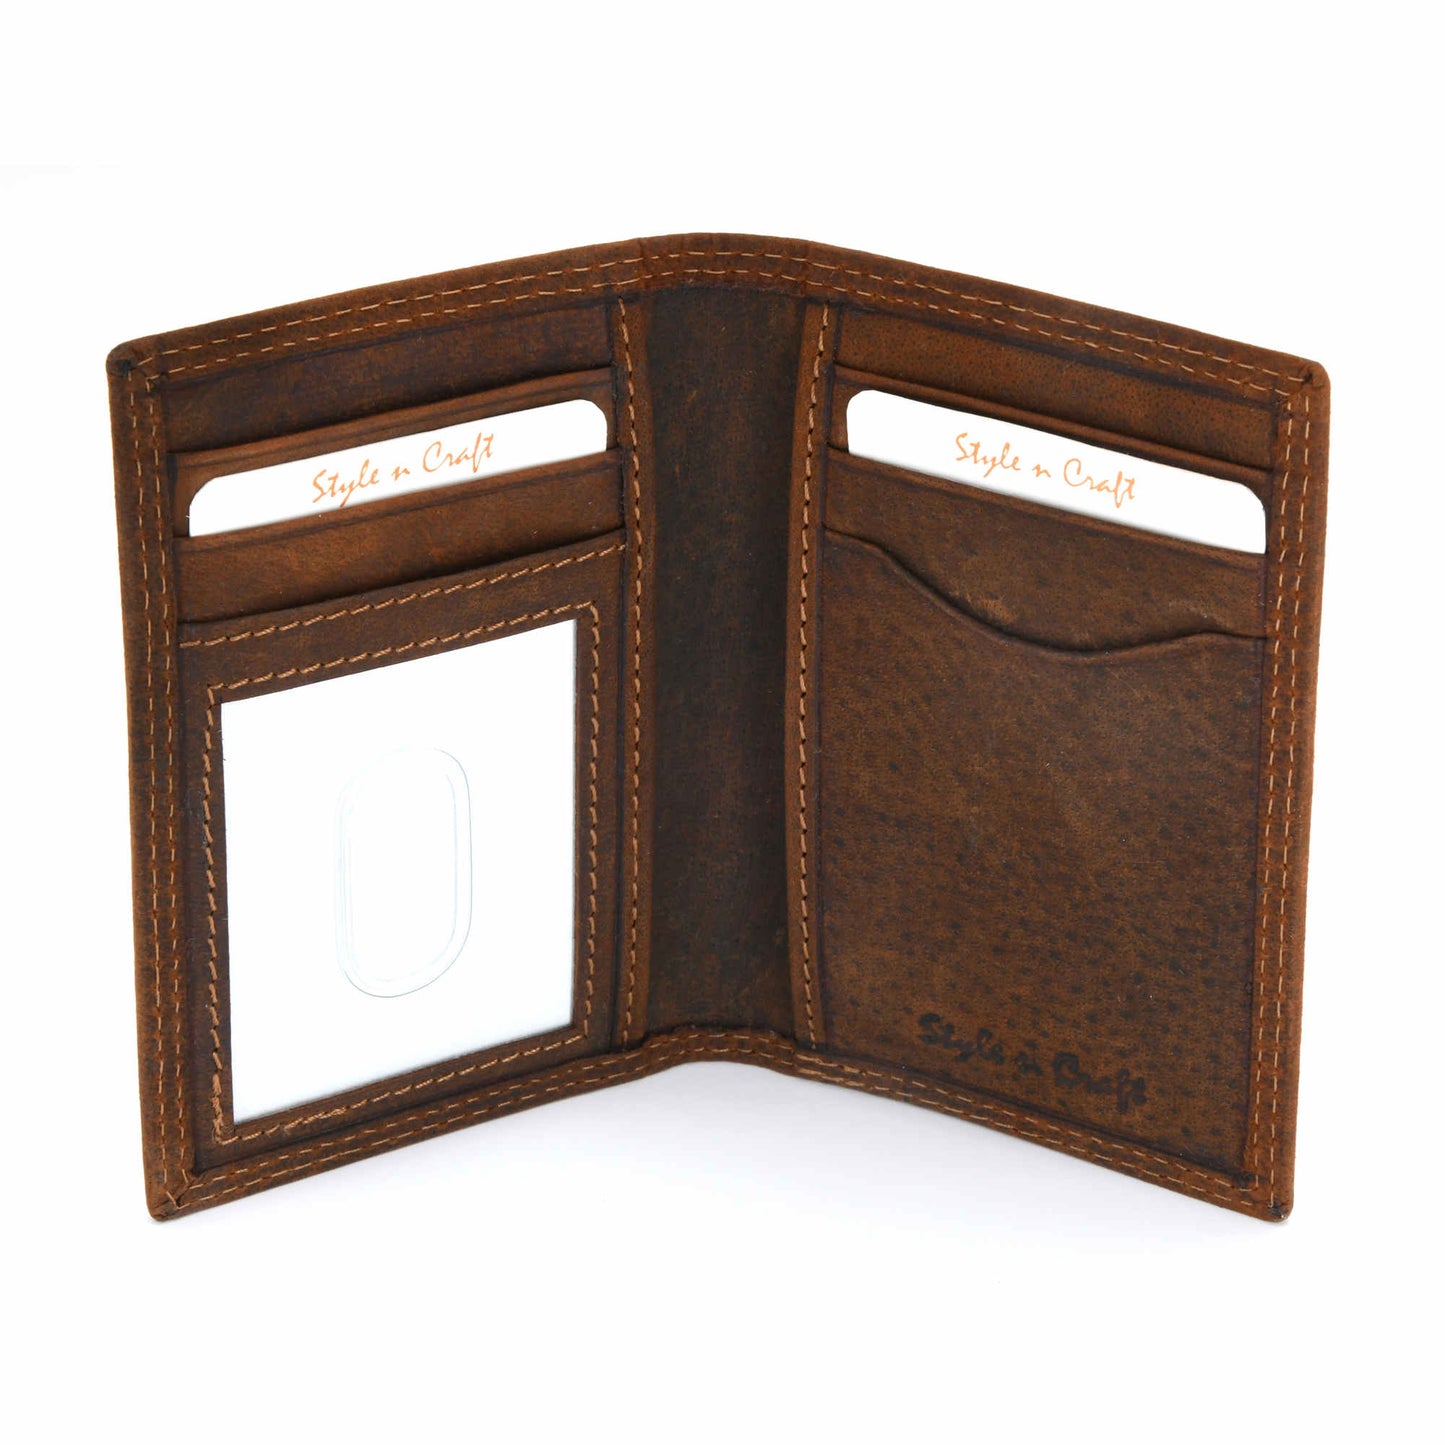 Style n Craft 300704 Credit Card / Business Card Case in Brown Leather - open view